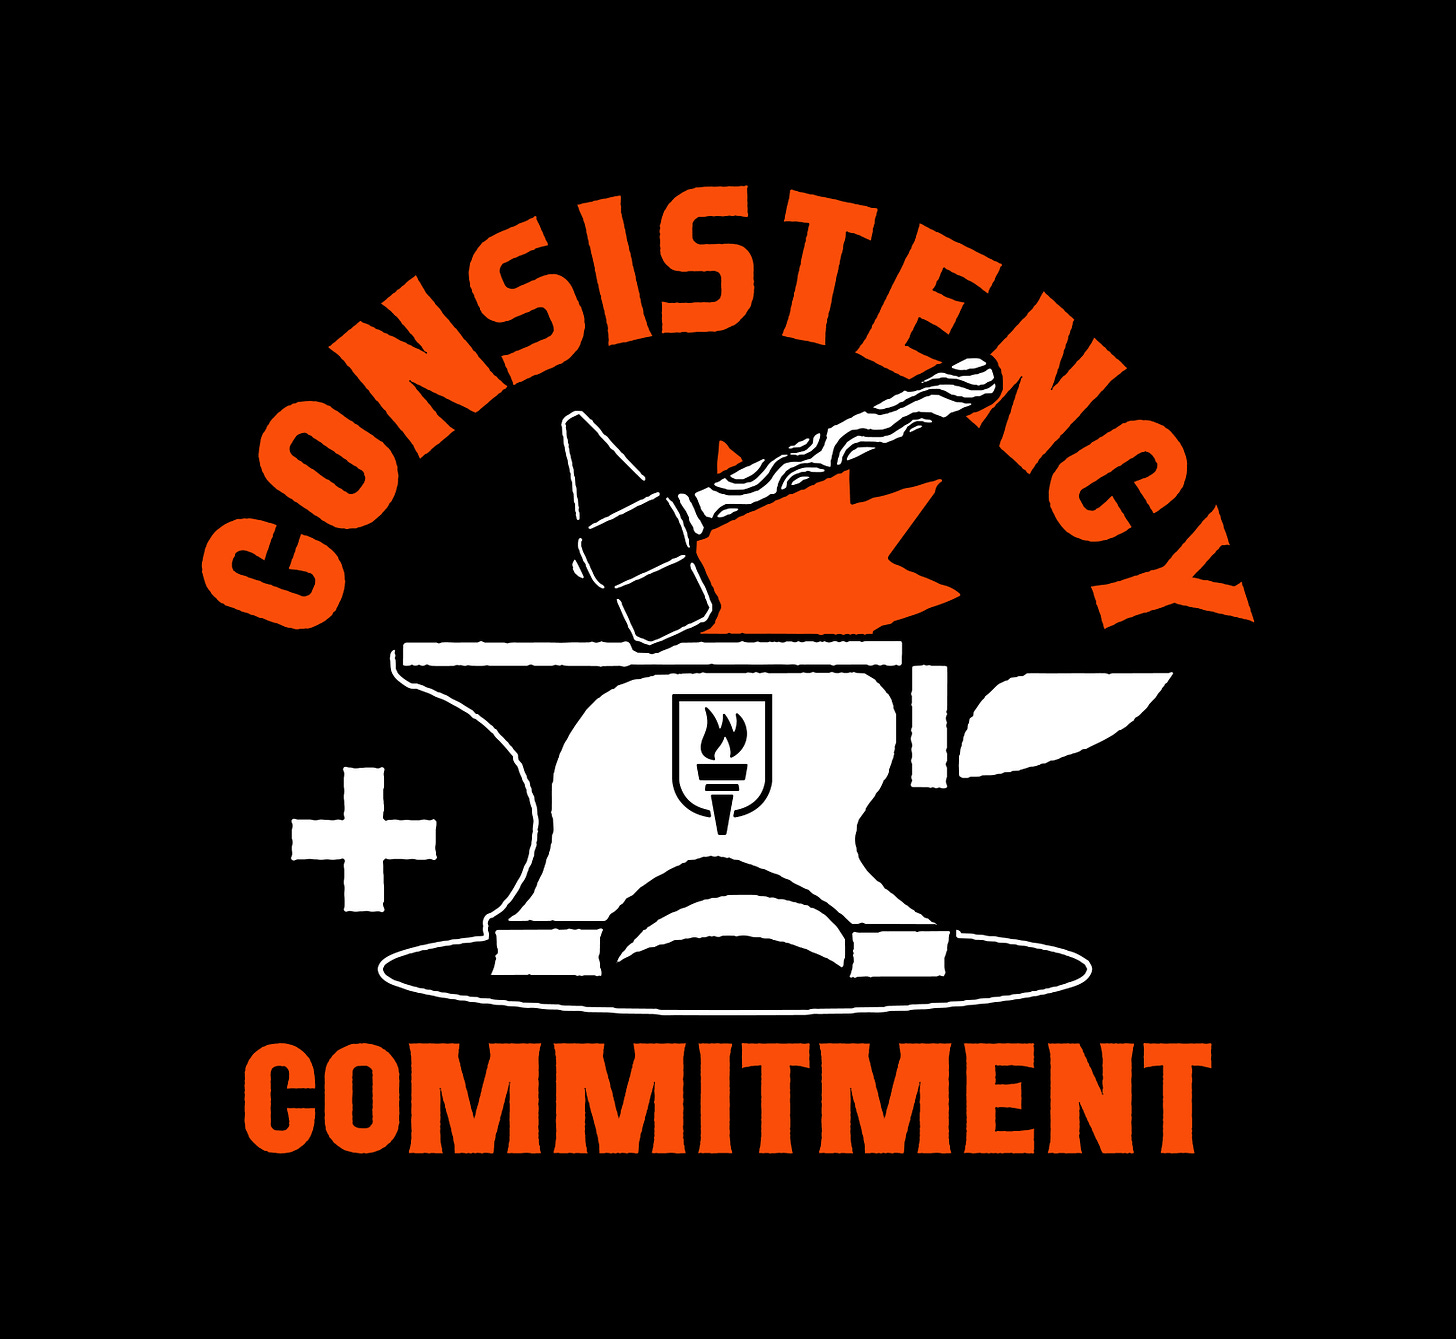 Logo of a new Willpower Running Collection called "Consistency + Commitment"